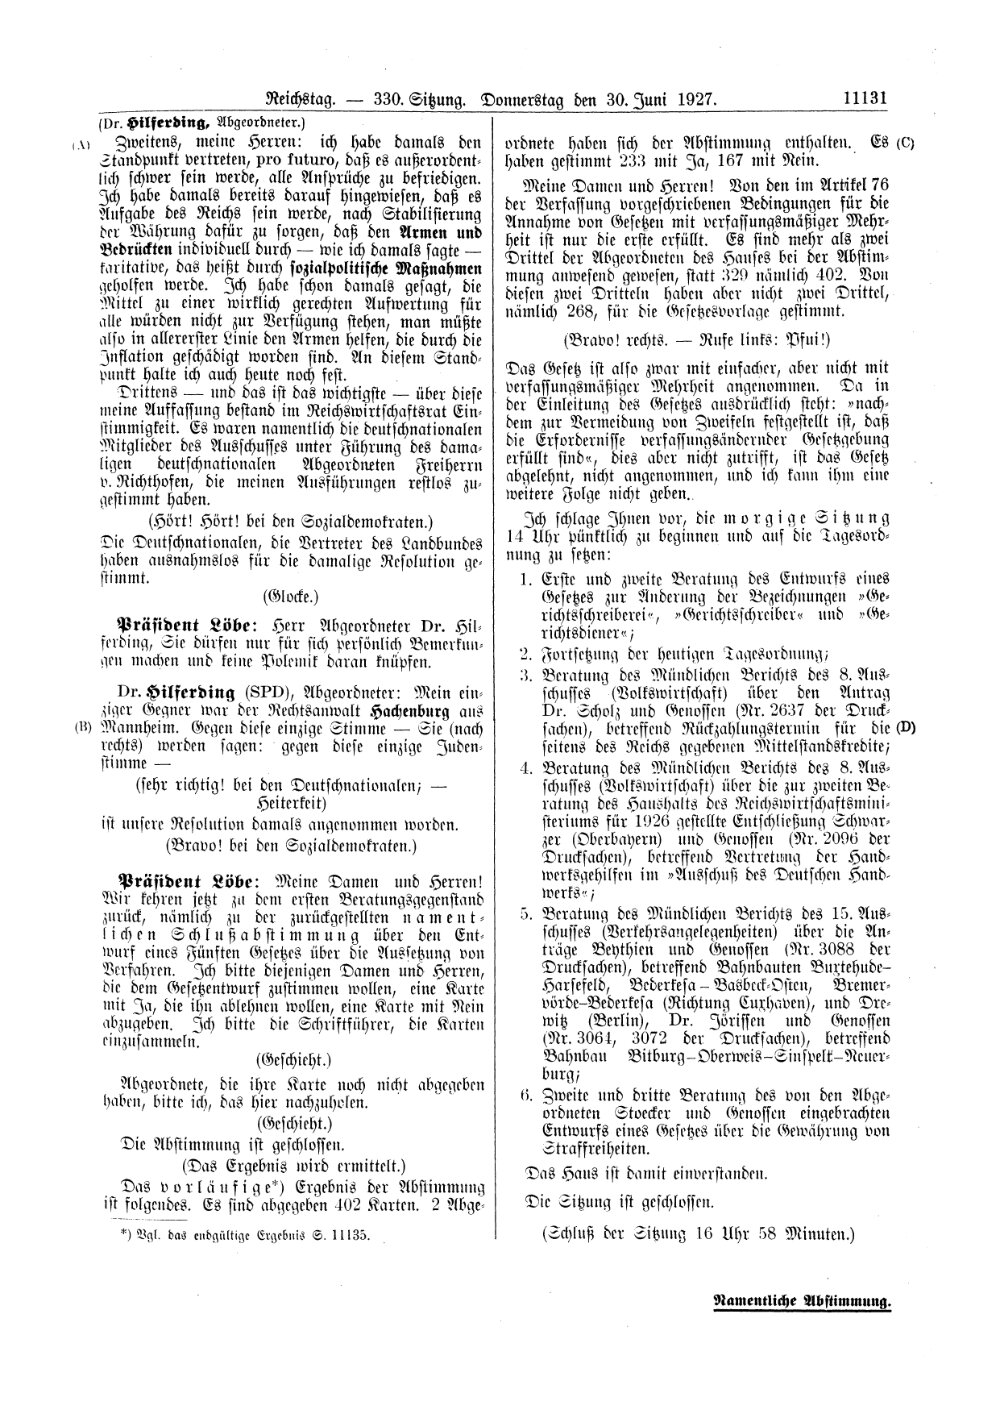 Scan of page 11131